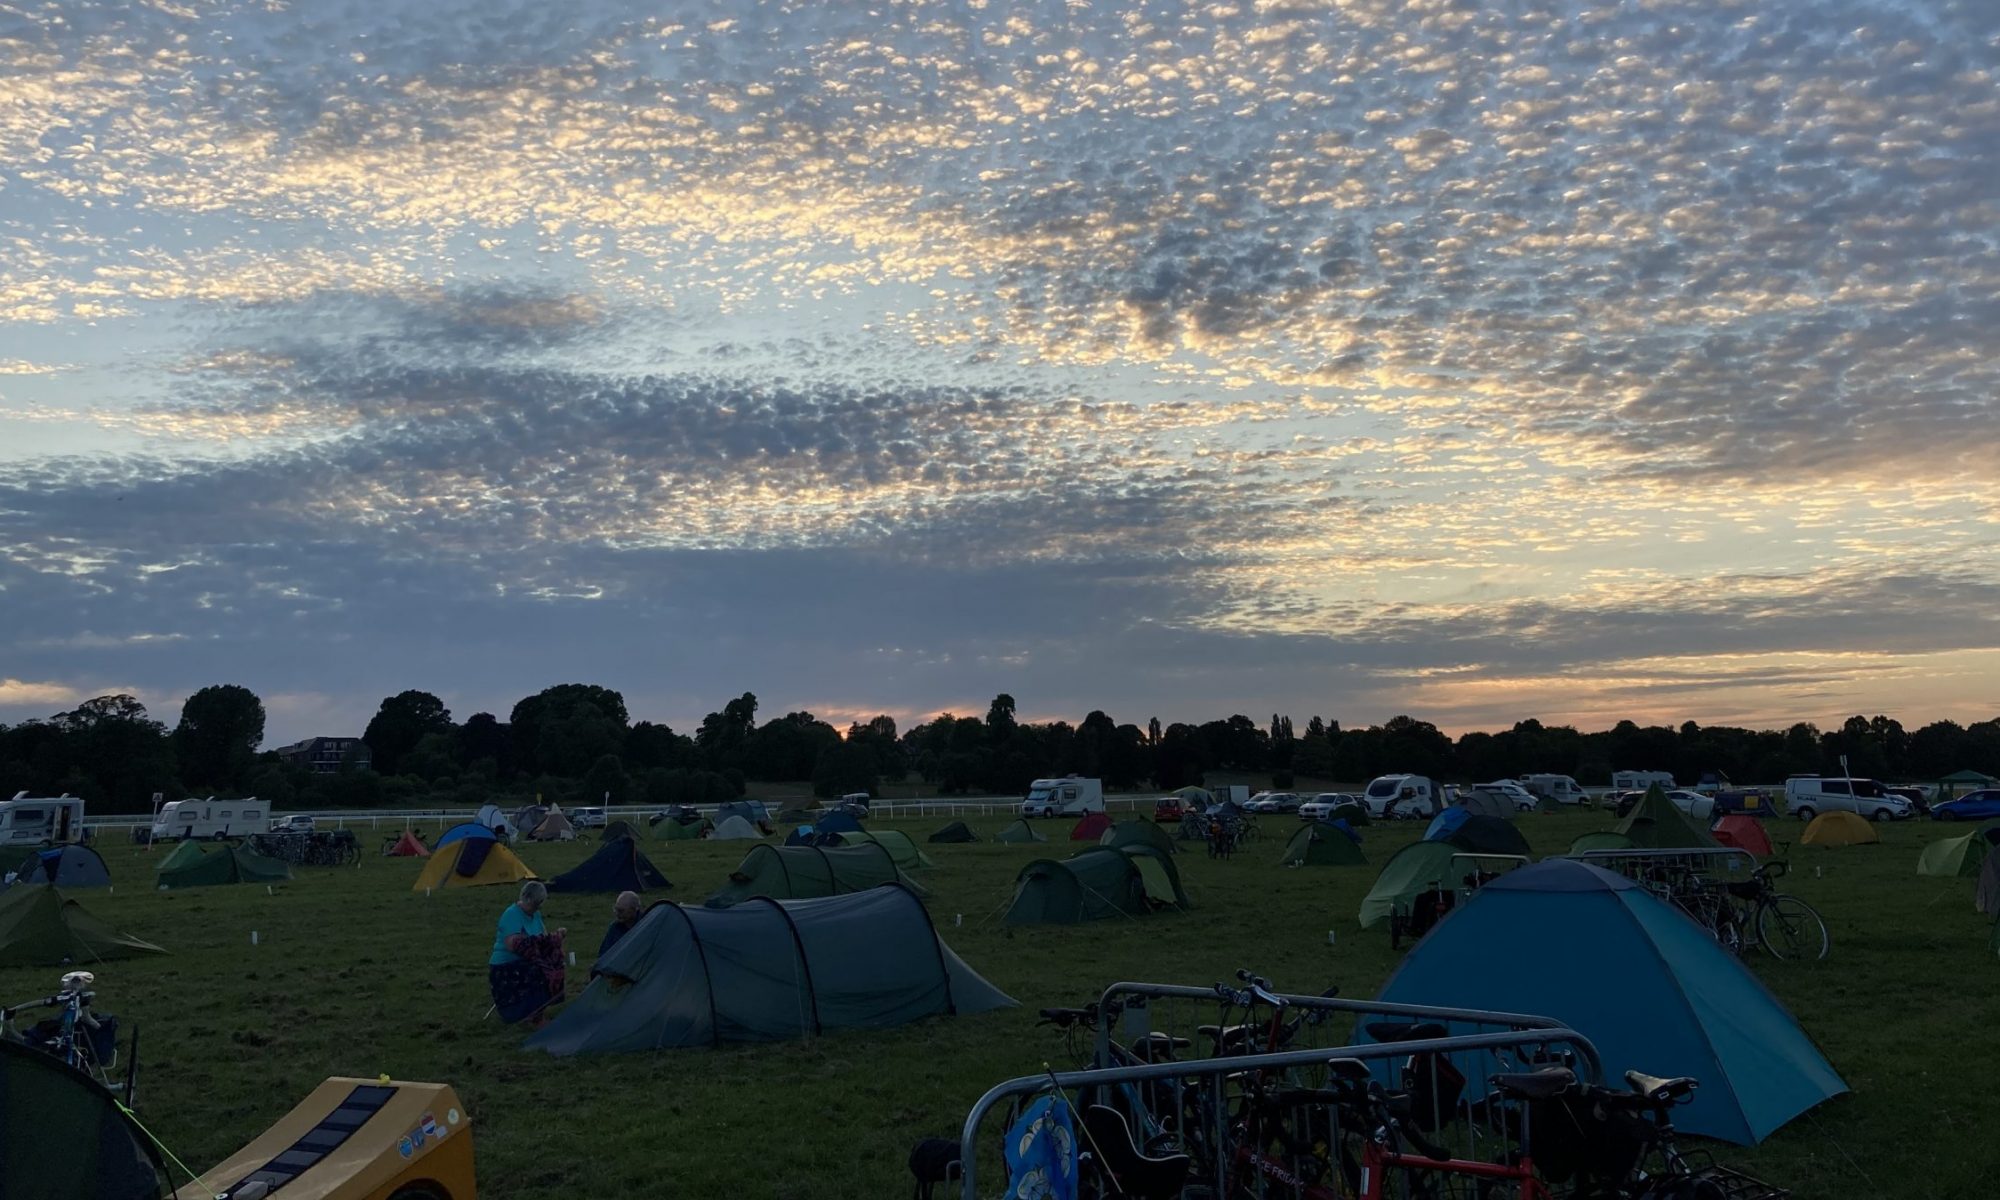 Photo by John Davies - sunset over the York Cycle Rally 2023 campsite - cropped